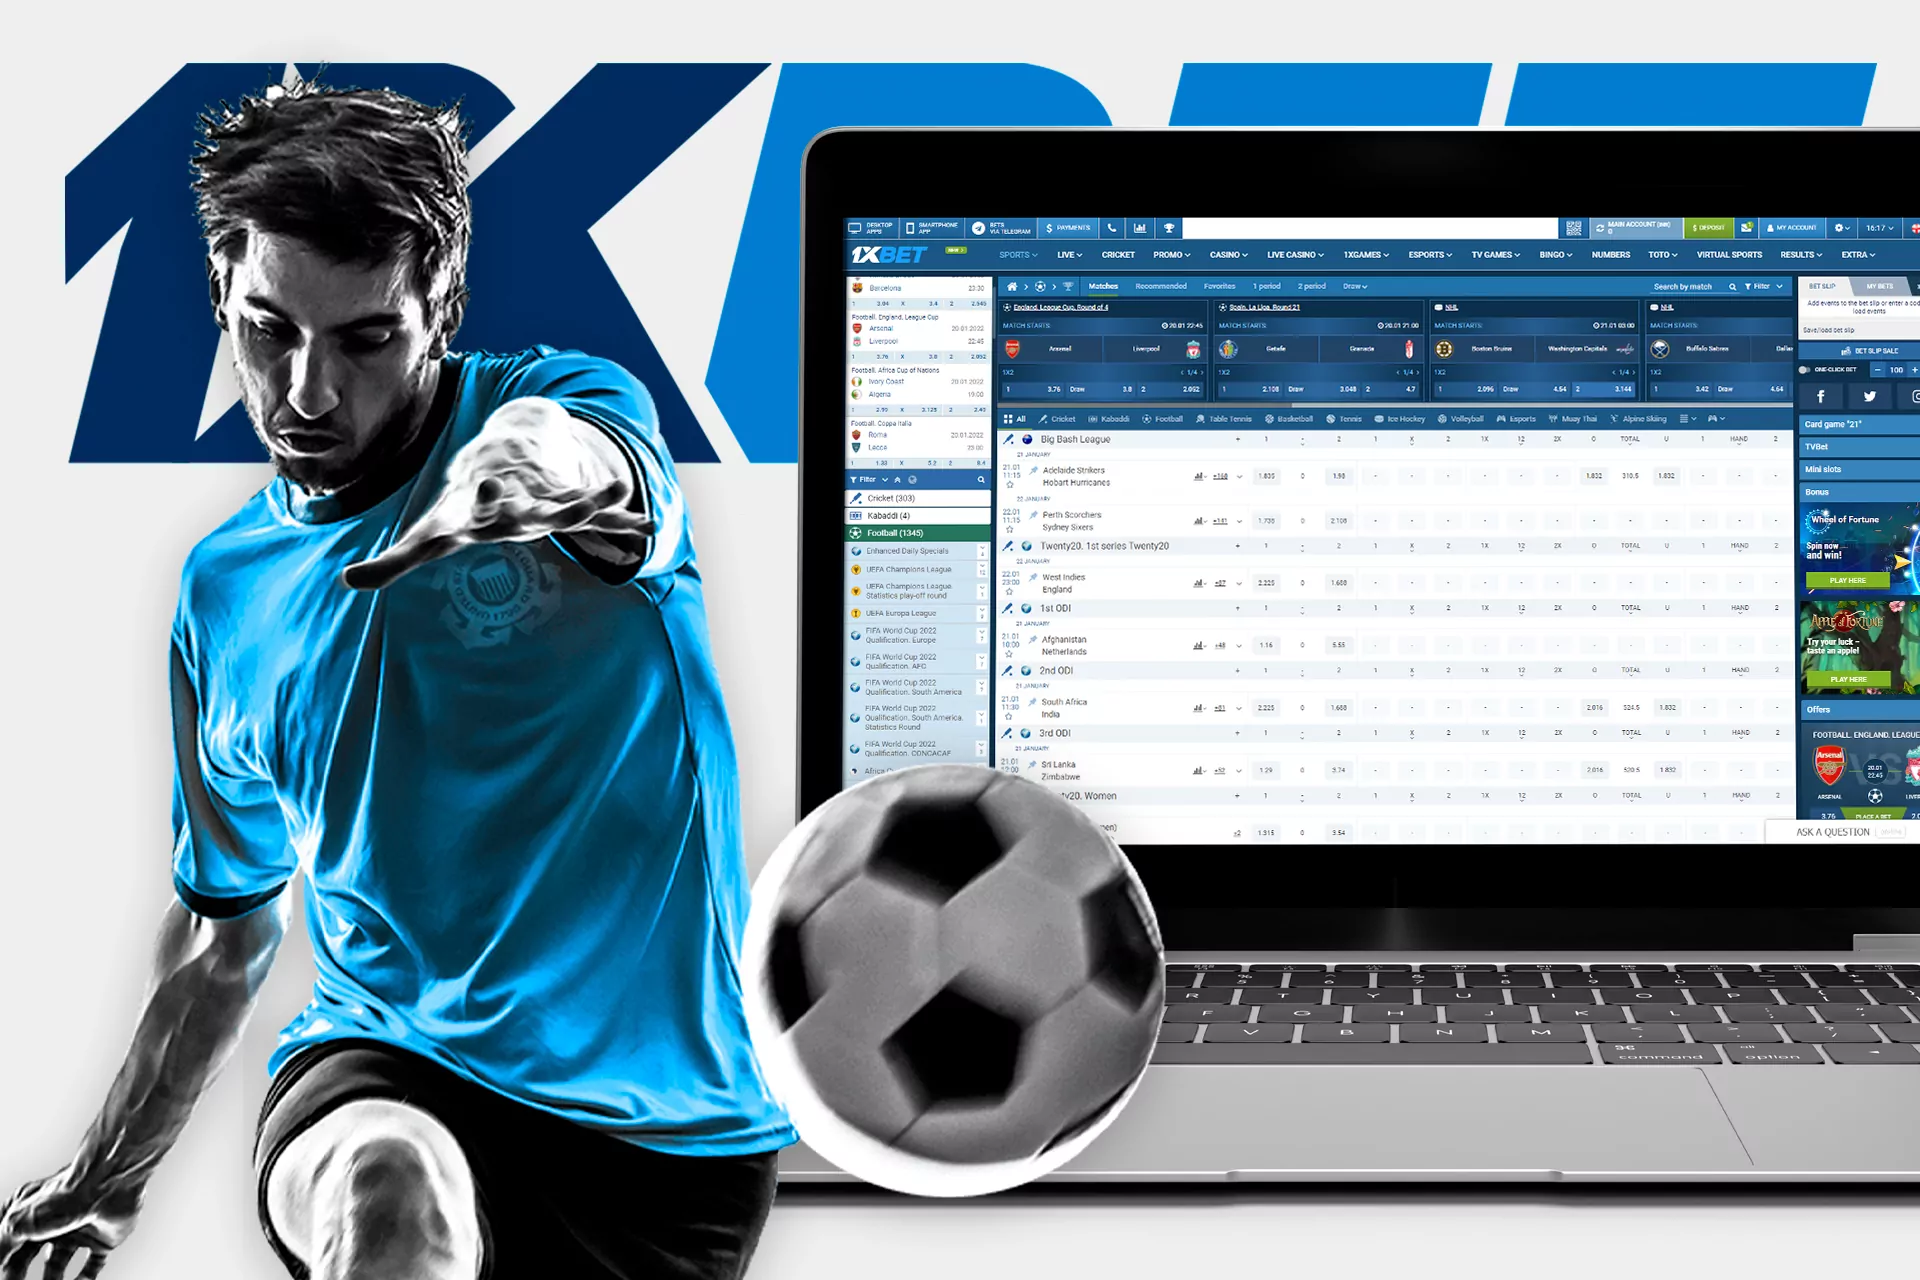 To place bets at 1xBet India website, firstly you need to create an account, or log in if you have already got one.